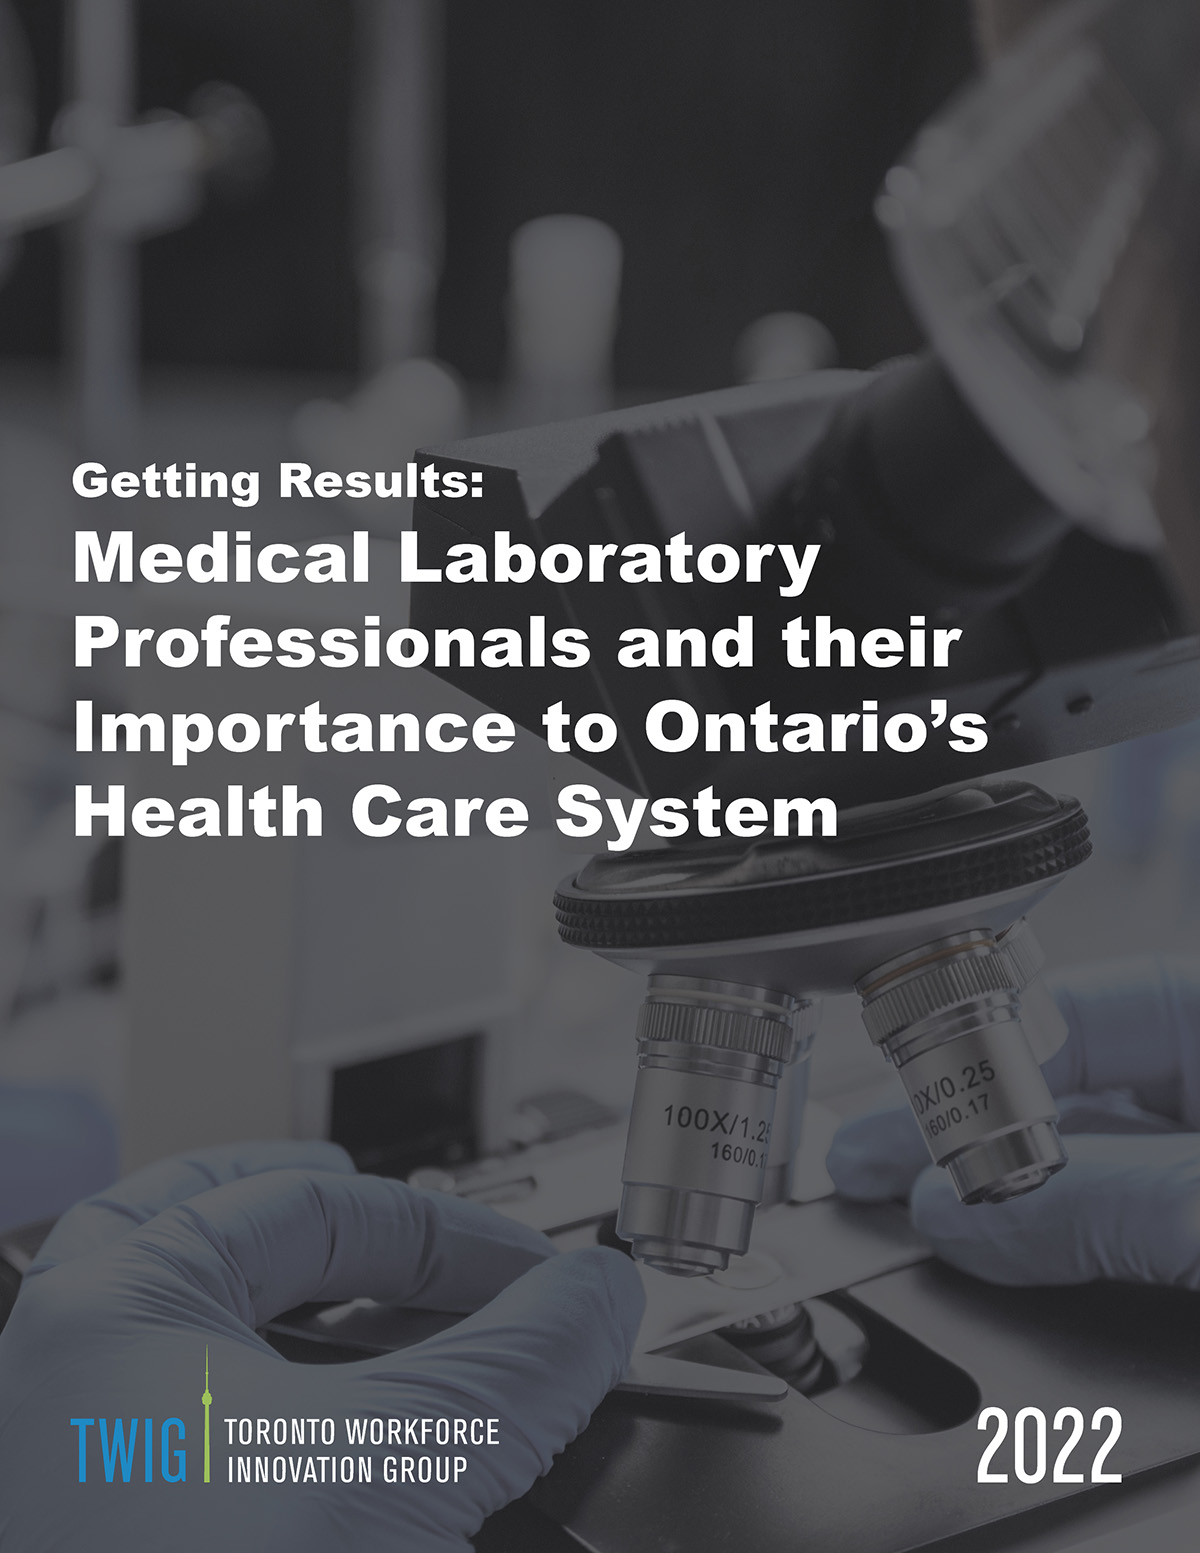 Getting Results: Medical Laboratory Professionals and their Importance to Ontario's Health Care System